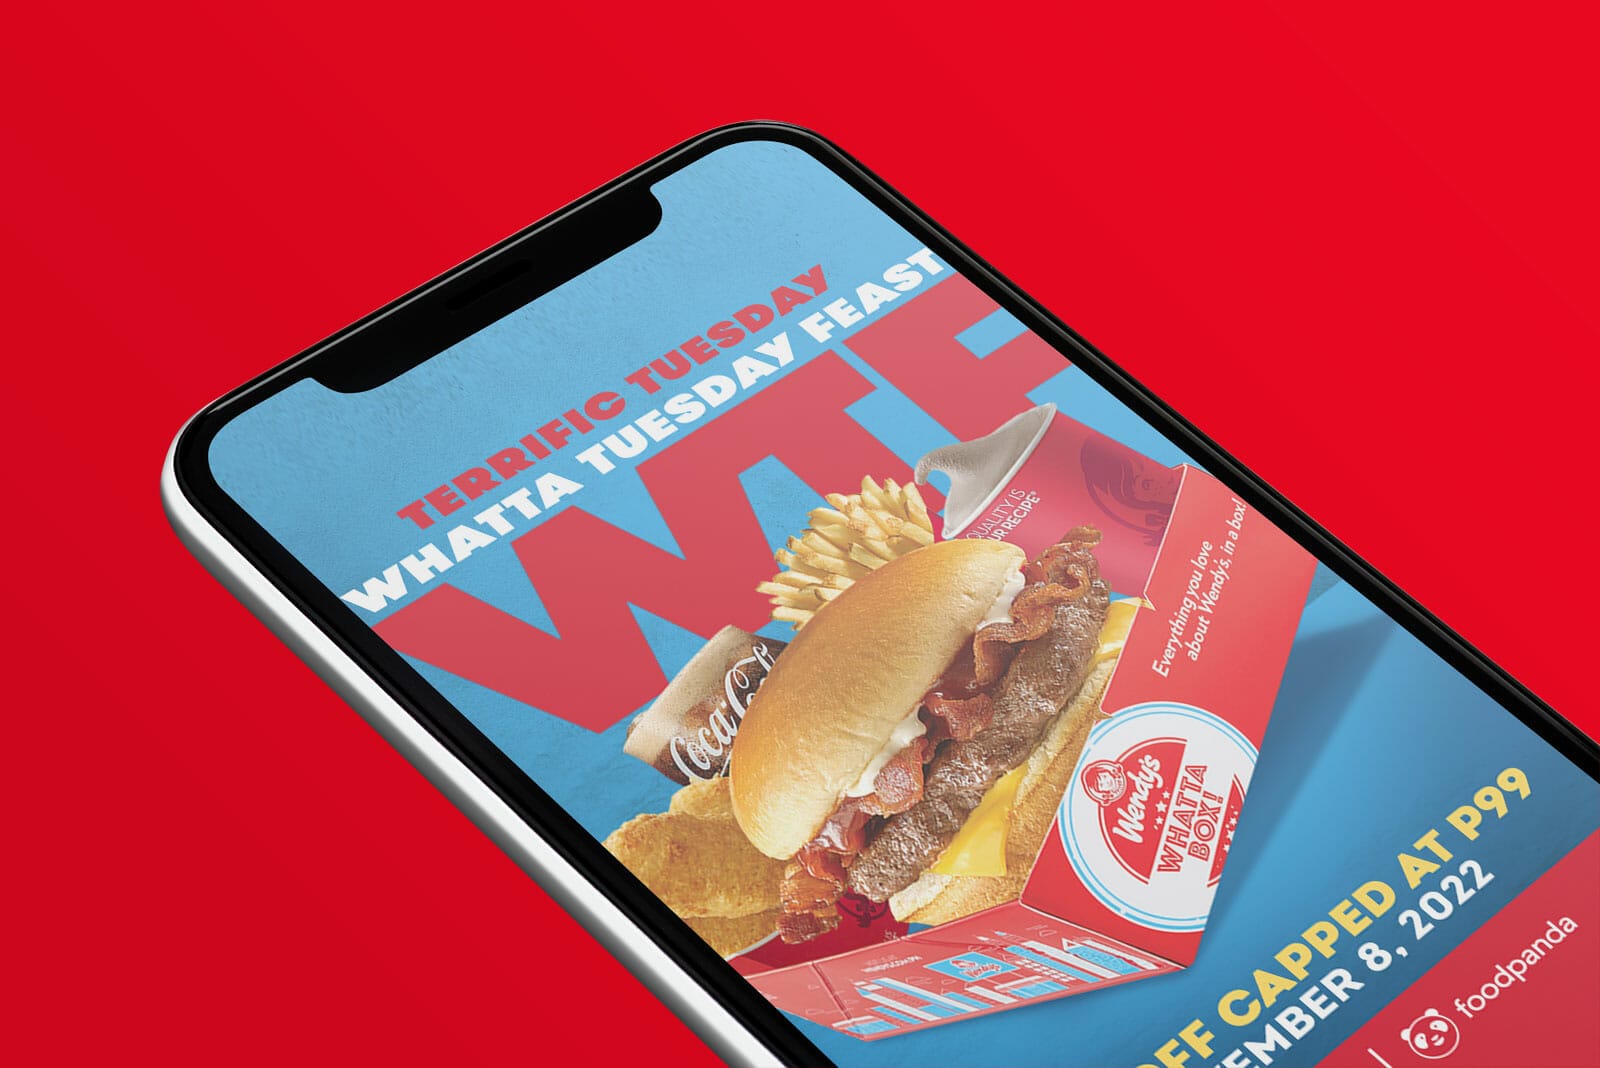 A phone with a burger ad on it.